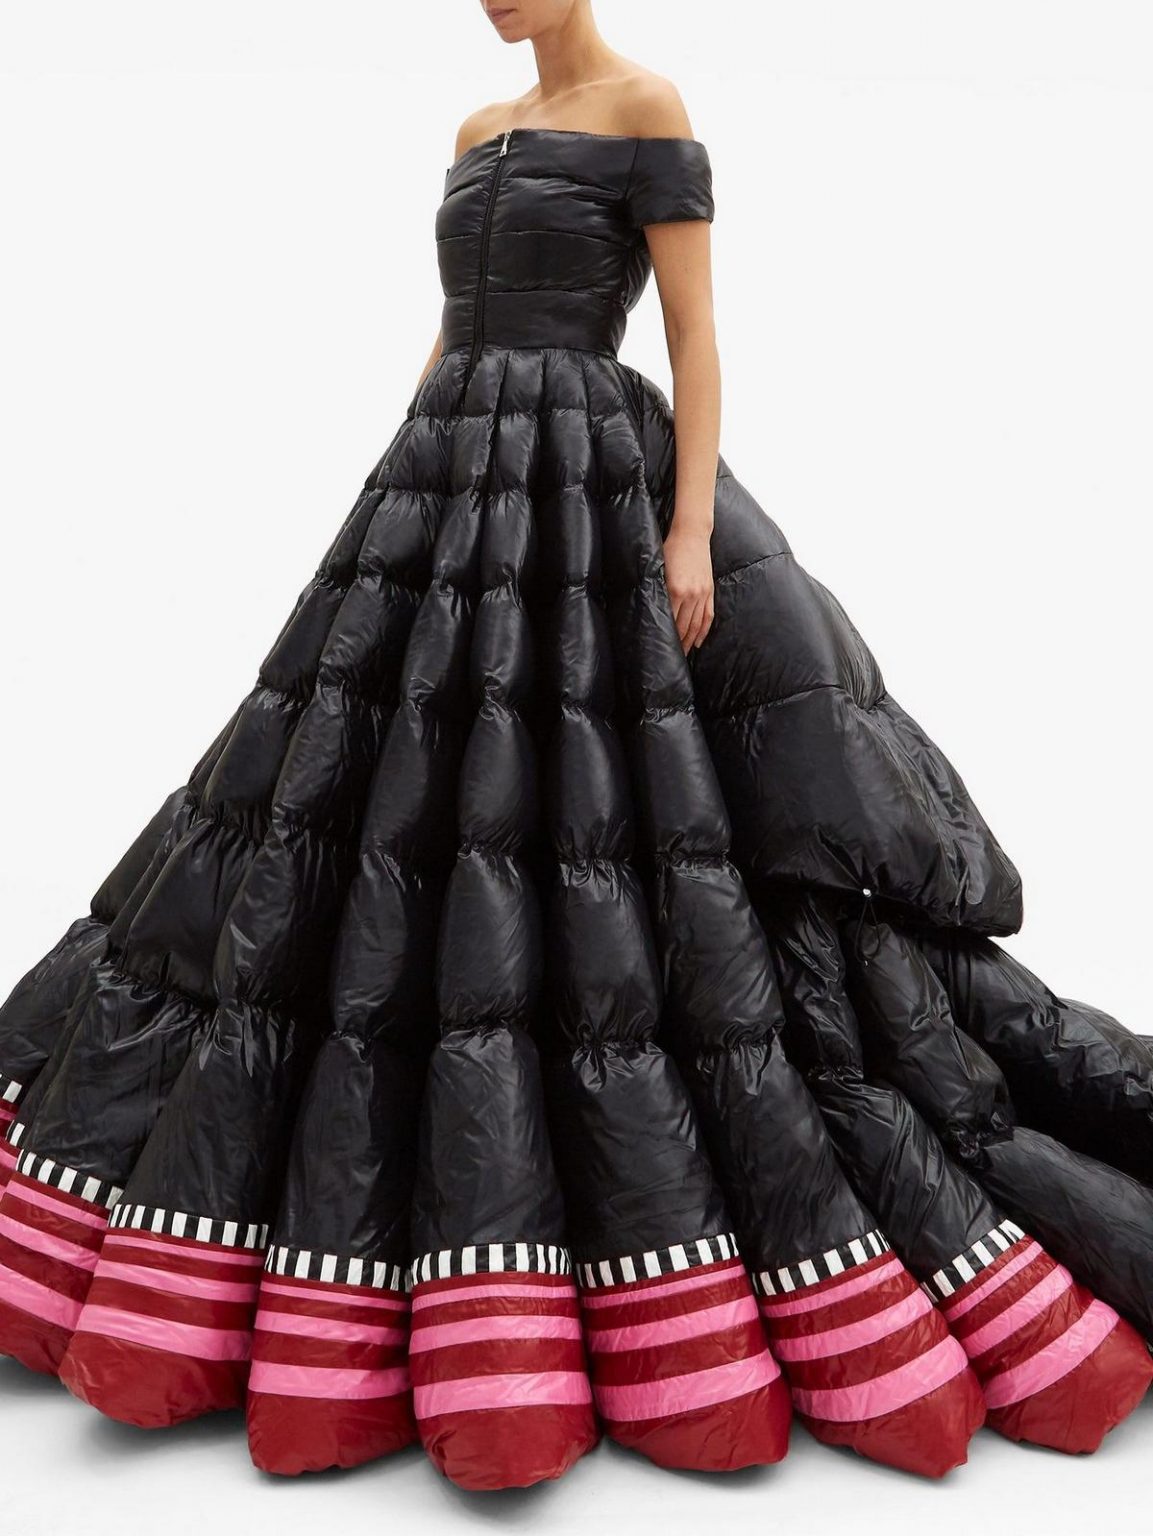 The Internet bashed and ridiculed Moncler’s $22,200 evening gown and ...